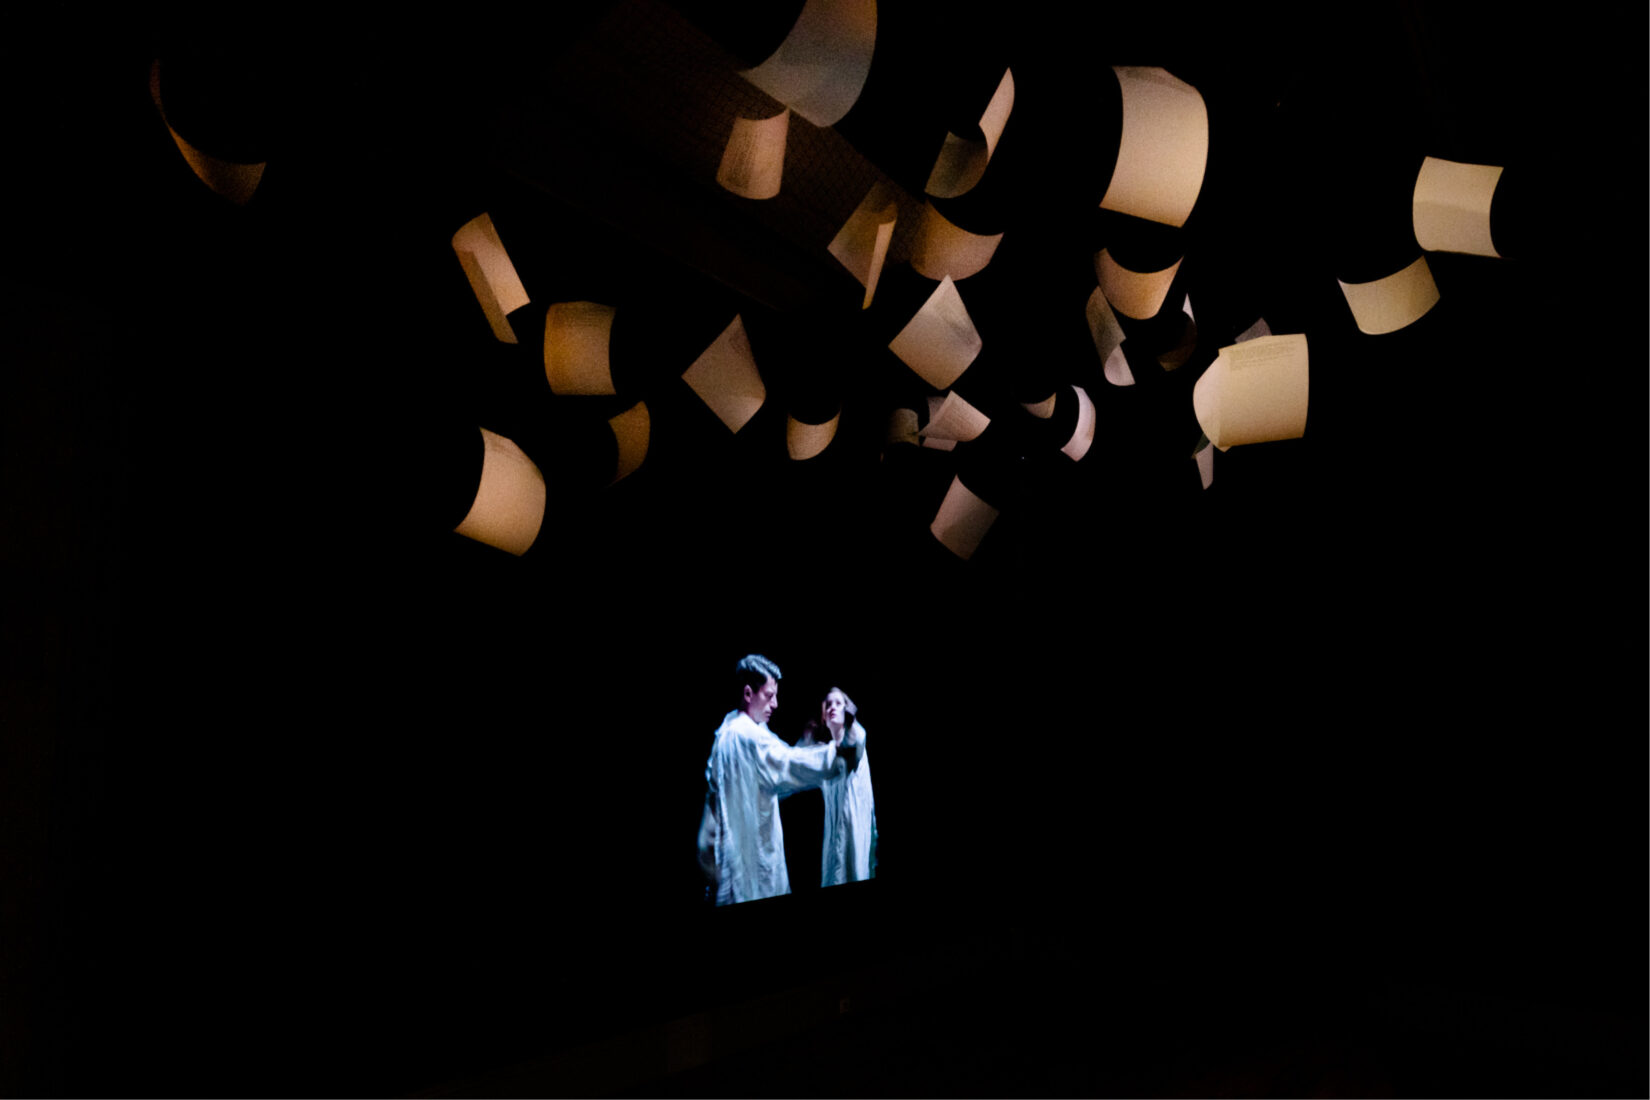 Photo of manuscript pages flying from the ceiling in the dark, and image of two actors acting a scene in the background.